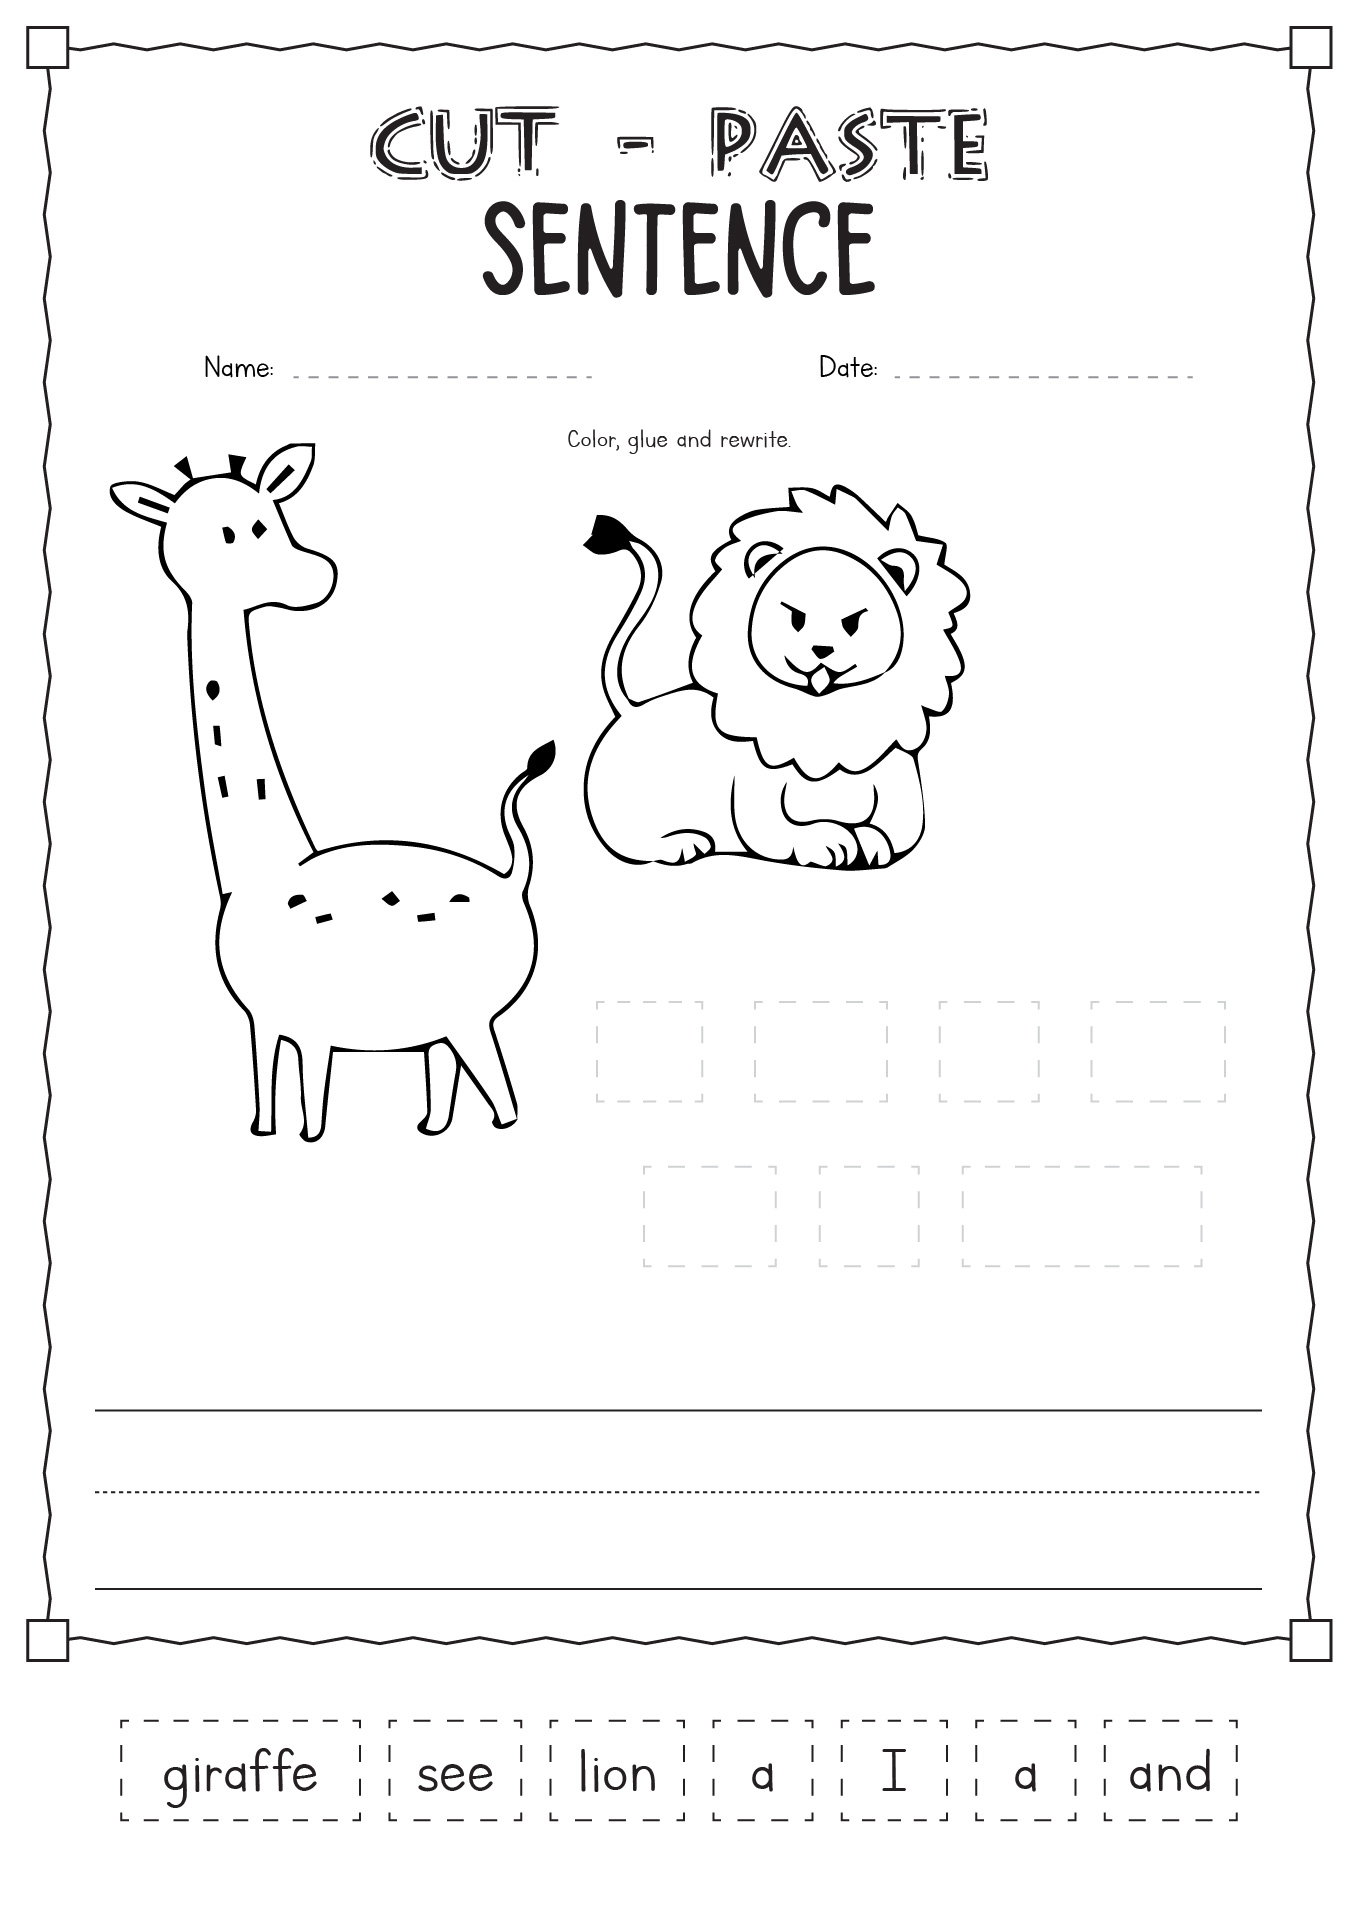 Cut and Paste Sentence Worksheets Image